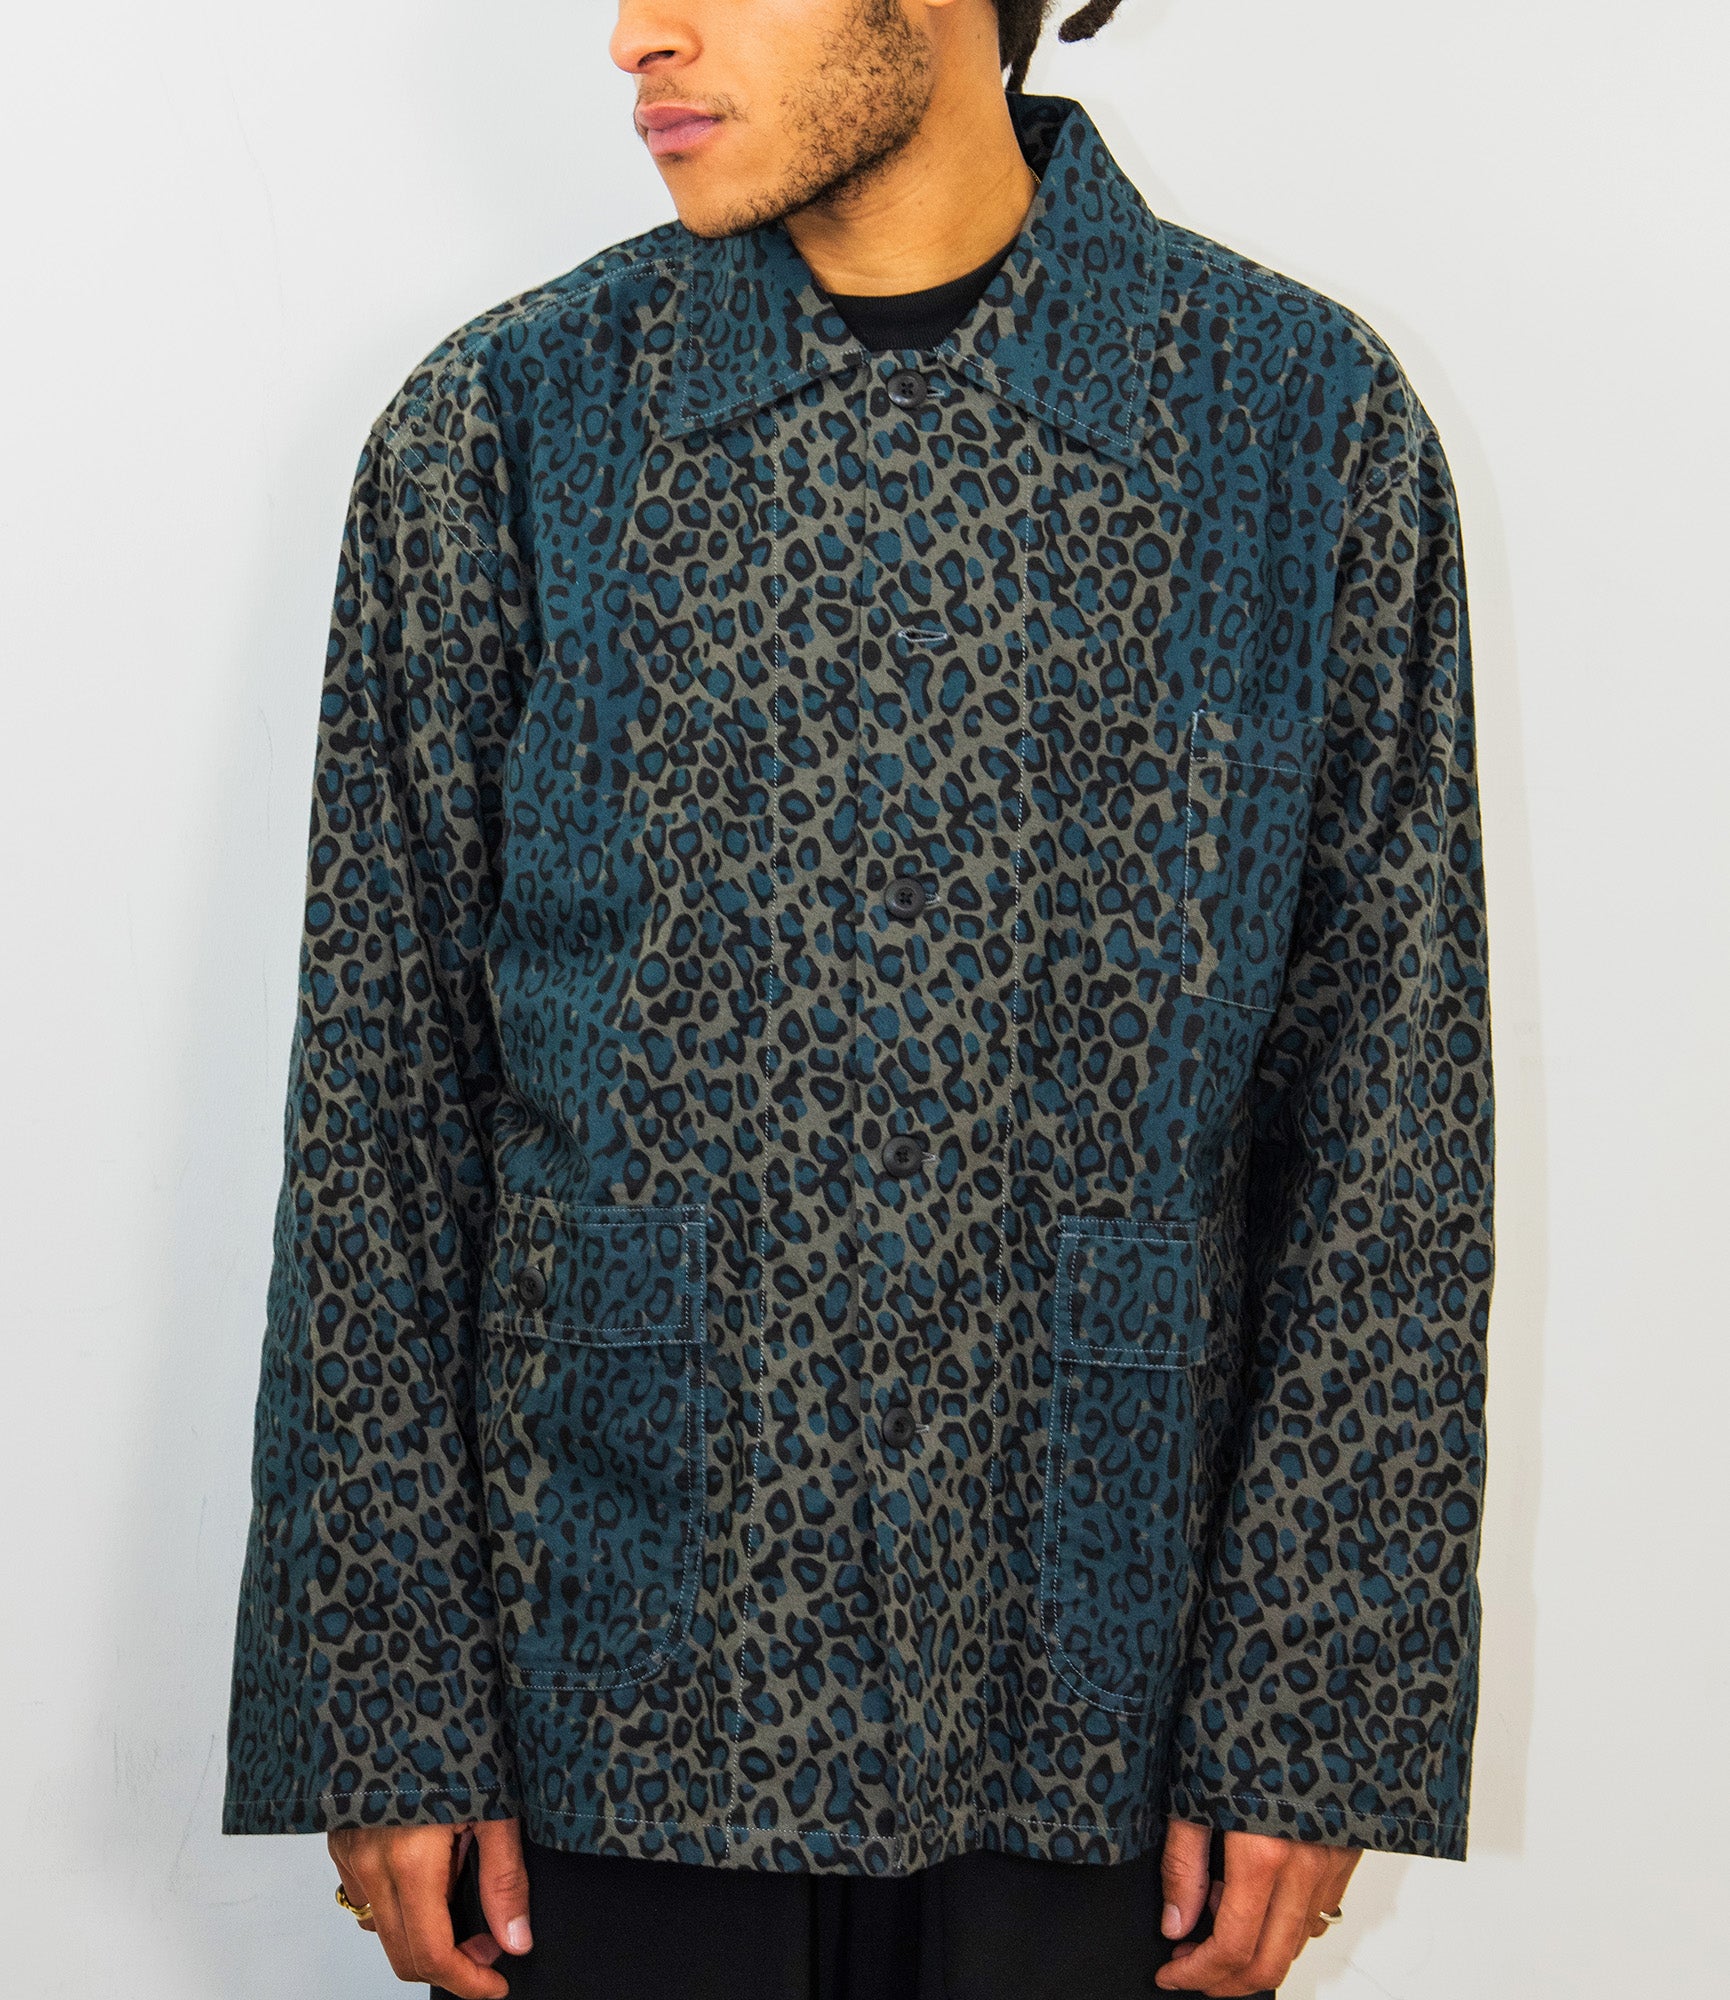 South2 West8 Hunting Shirt - Flannel Cloth / Printed - Leopard